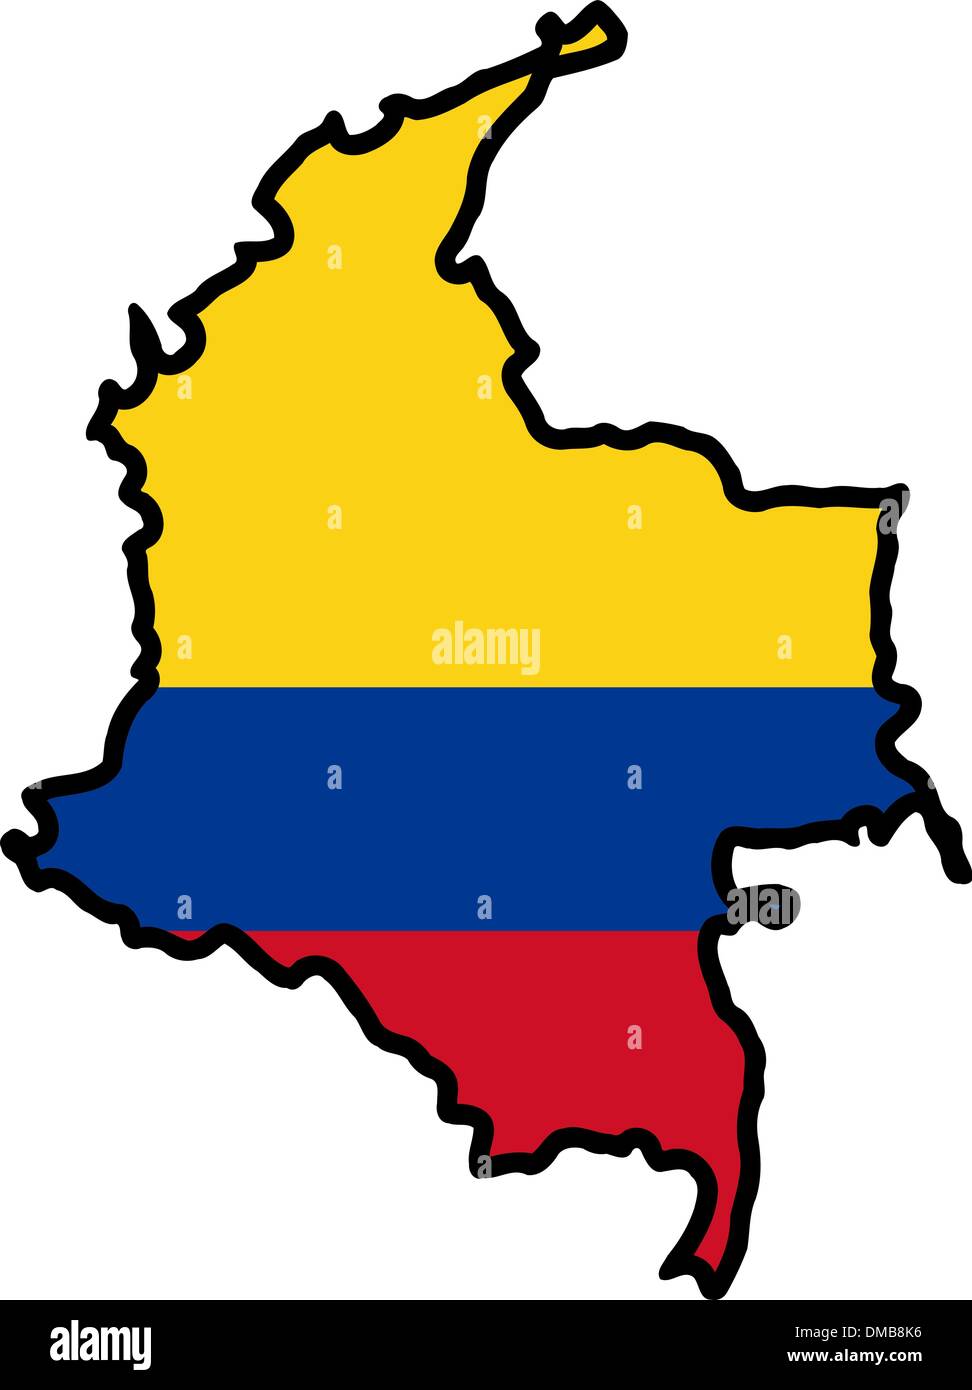 Illustration of flag in map of Colombia Stock Vector